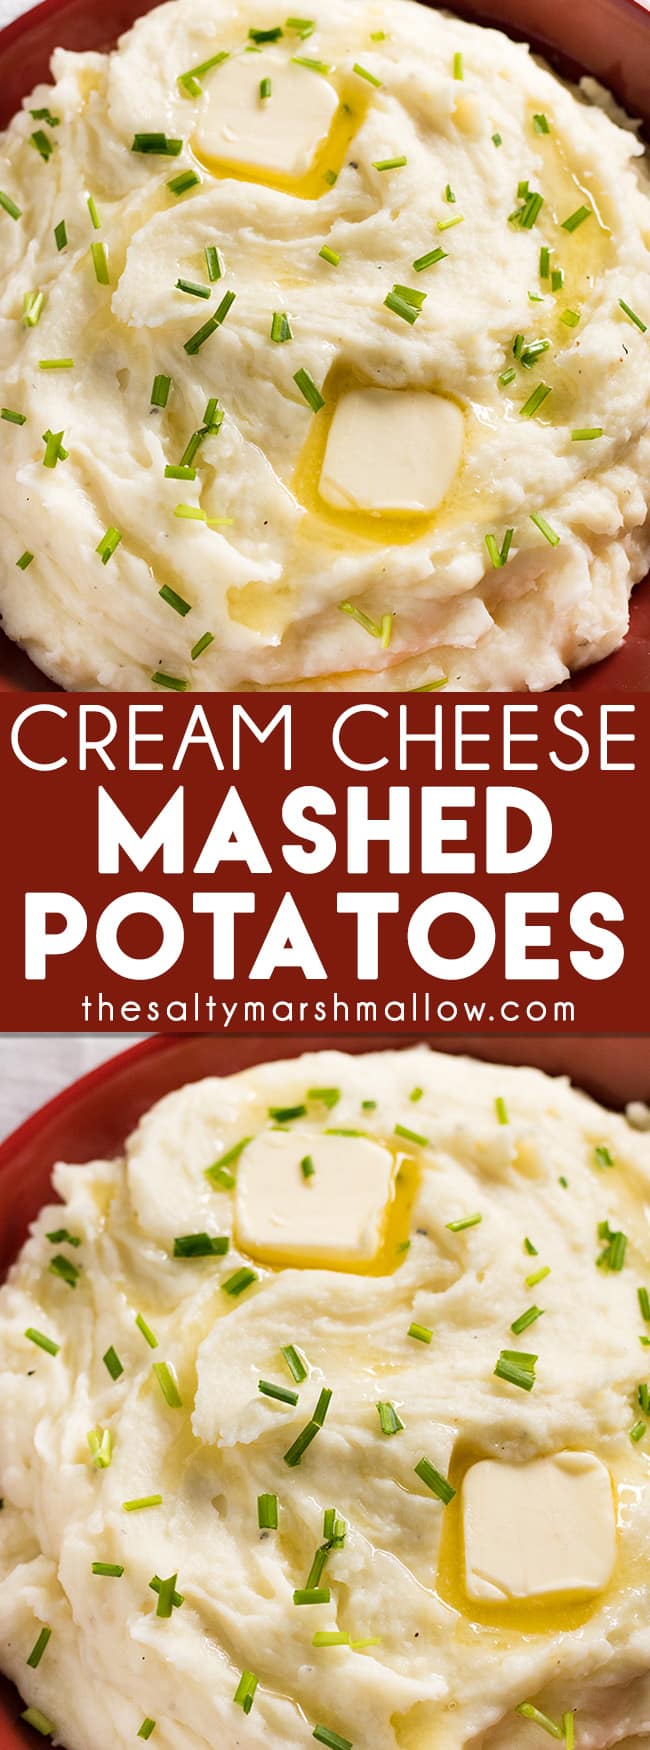 Cream Cheese Mashed Potatoes - The Salty Marshmallow